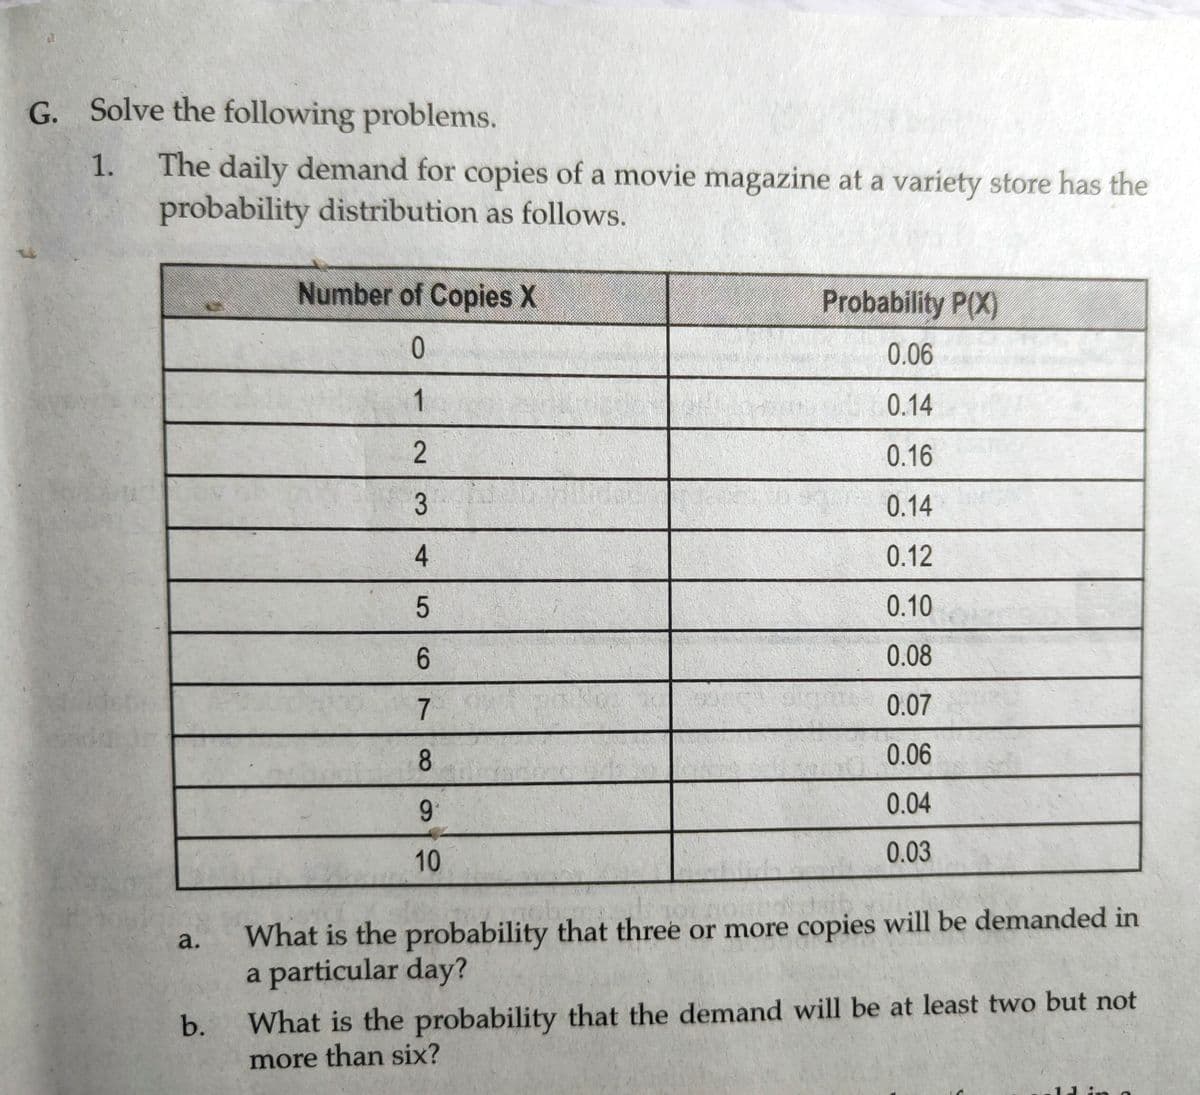 G. Solve the following problems.
The daily demand for copies of a movie magazine at a variety store has the
probability distribution as follows.
1.
Number of Copies X
Probability P(X)
0.06
1
0.14
2
0.16
3
0.14
4
0.12
0.10
6.
0.08
7.
0.07
8.
0.06
9.
0.04
10
0.03
What is the probability that three or more copies will be demanded in
a particular day?
a.
b.
What is the probability that the demand will be at least two but not
more than six?
in
